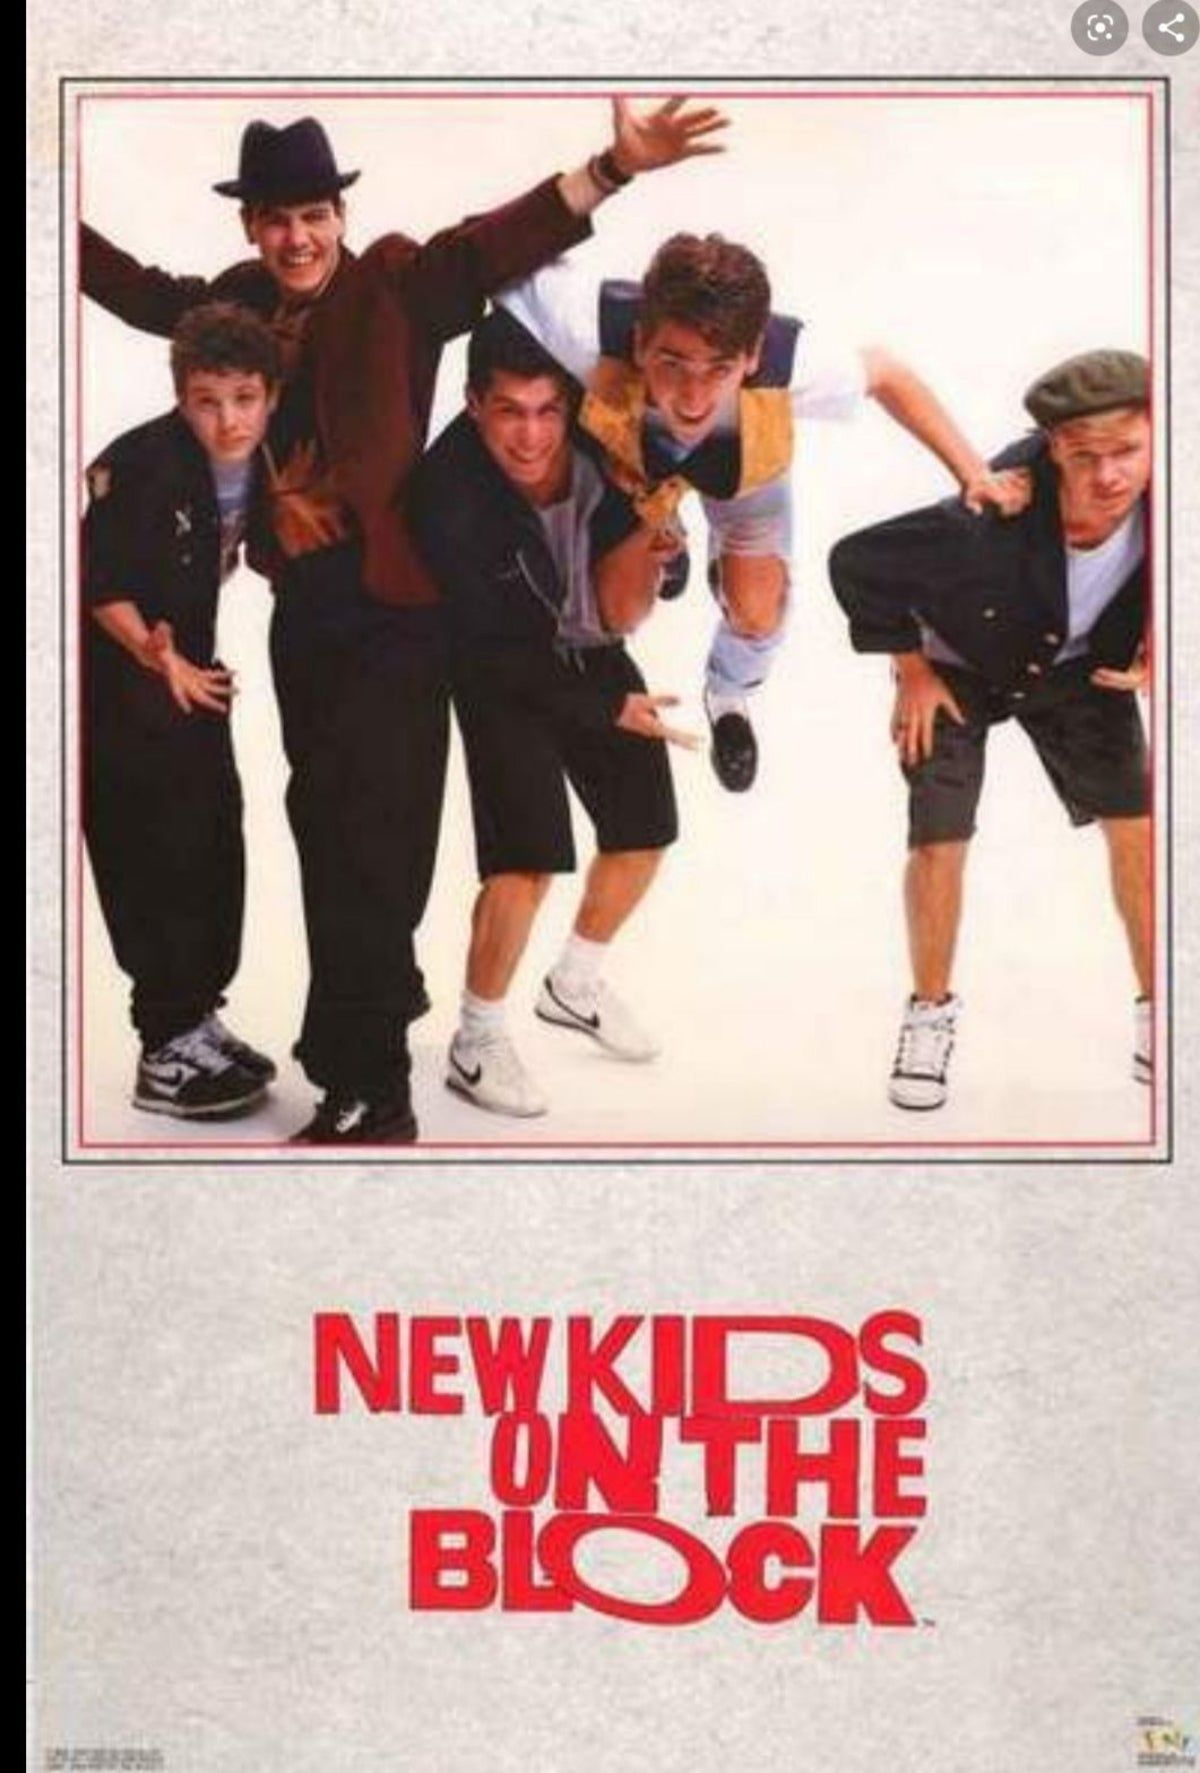 New kids on the block poster. New kids on the block, New